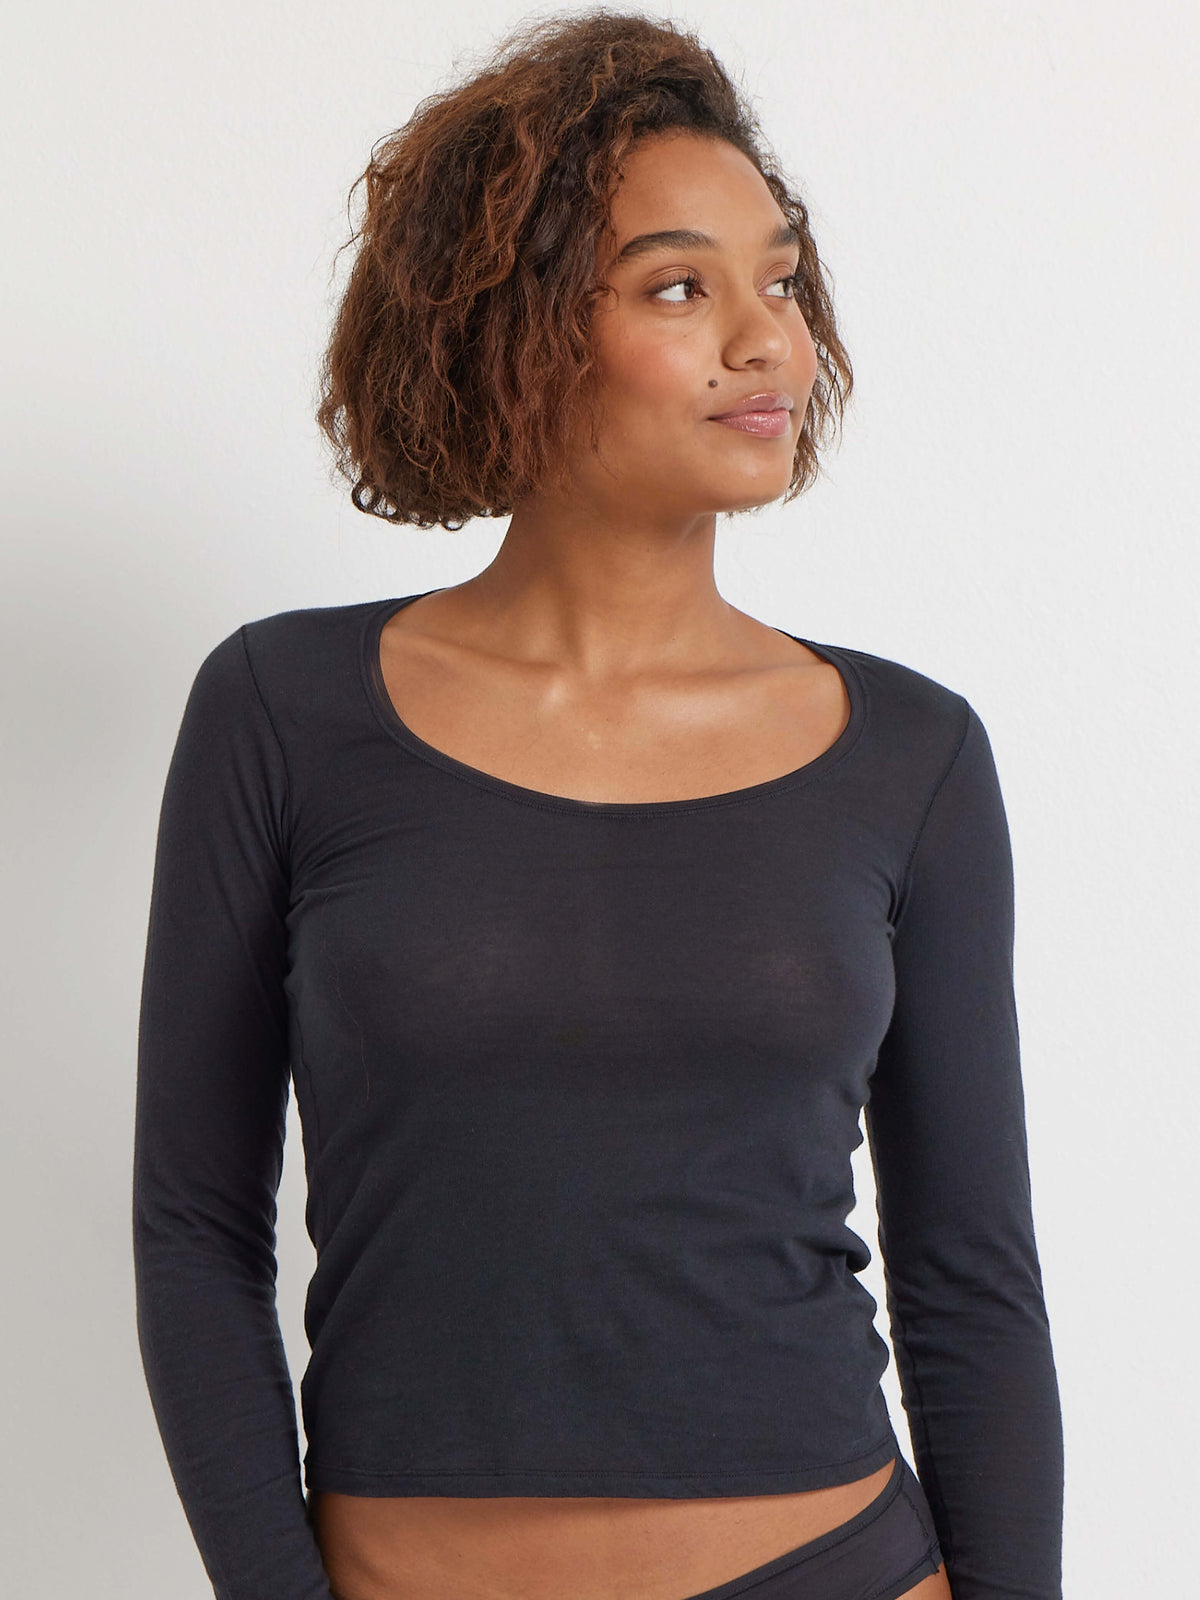 Pure Cotton Long Sleeve Black Layering Top by Kayser Lingerie